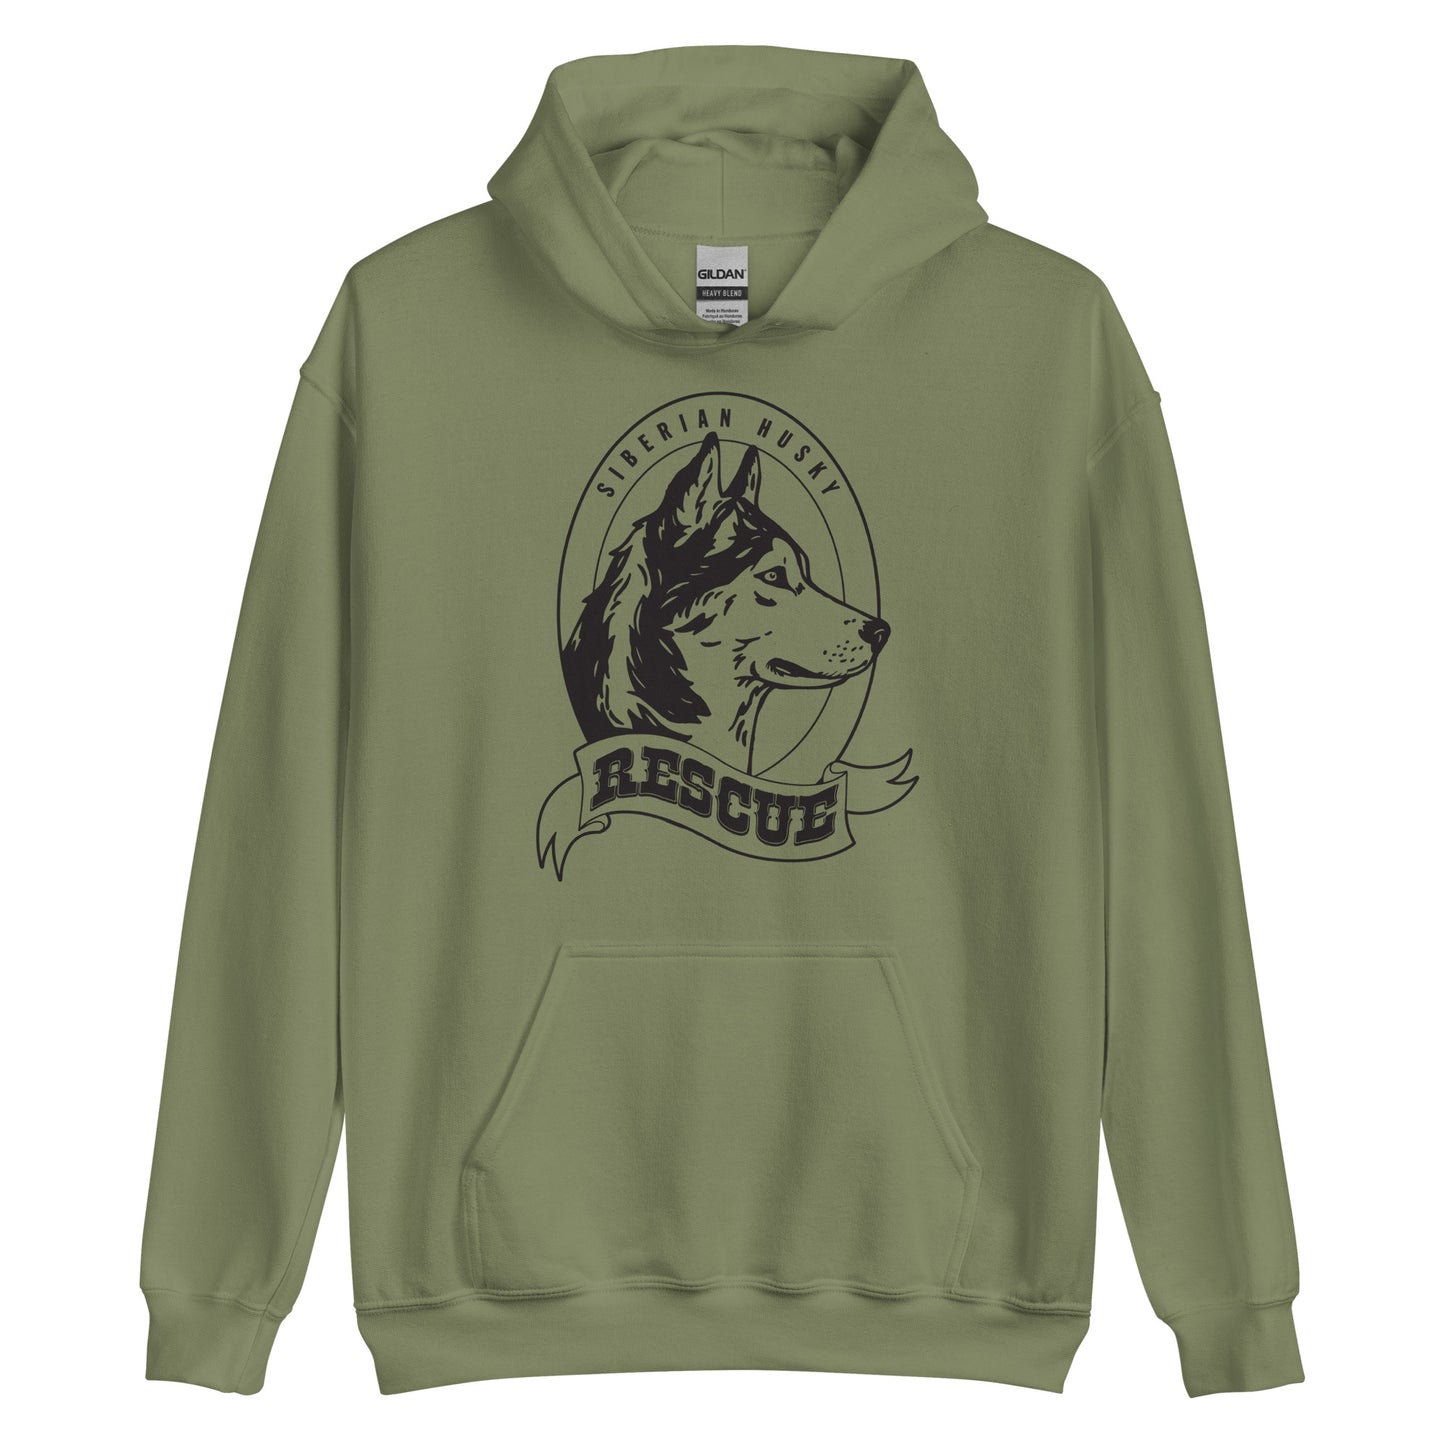 Siberian Husky Rescue - Pullover Hoodie